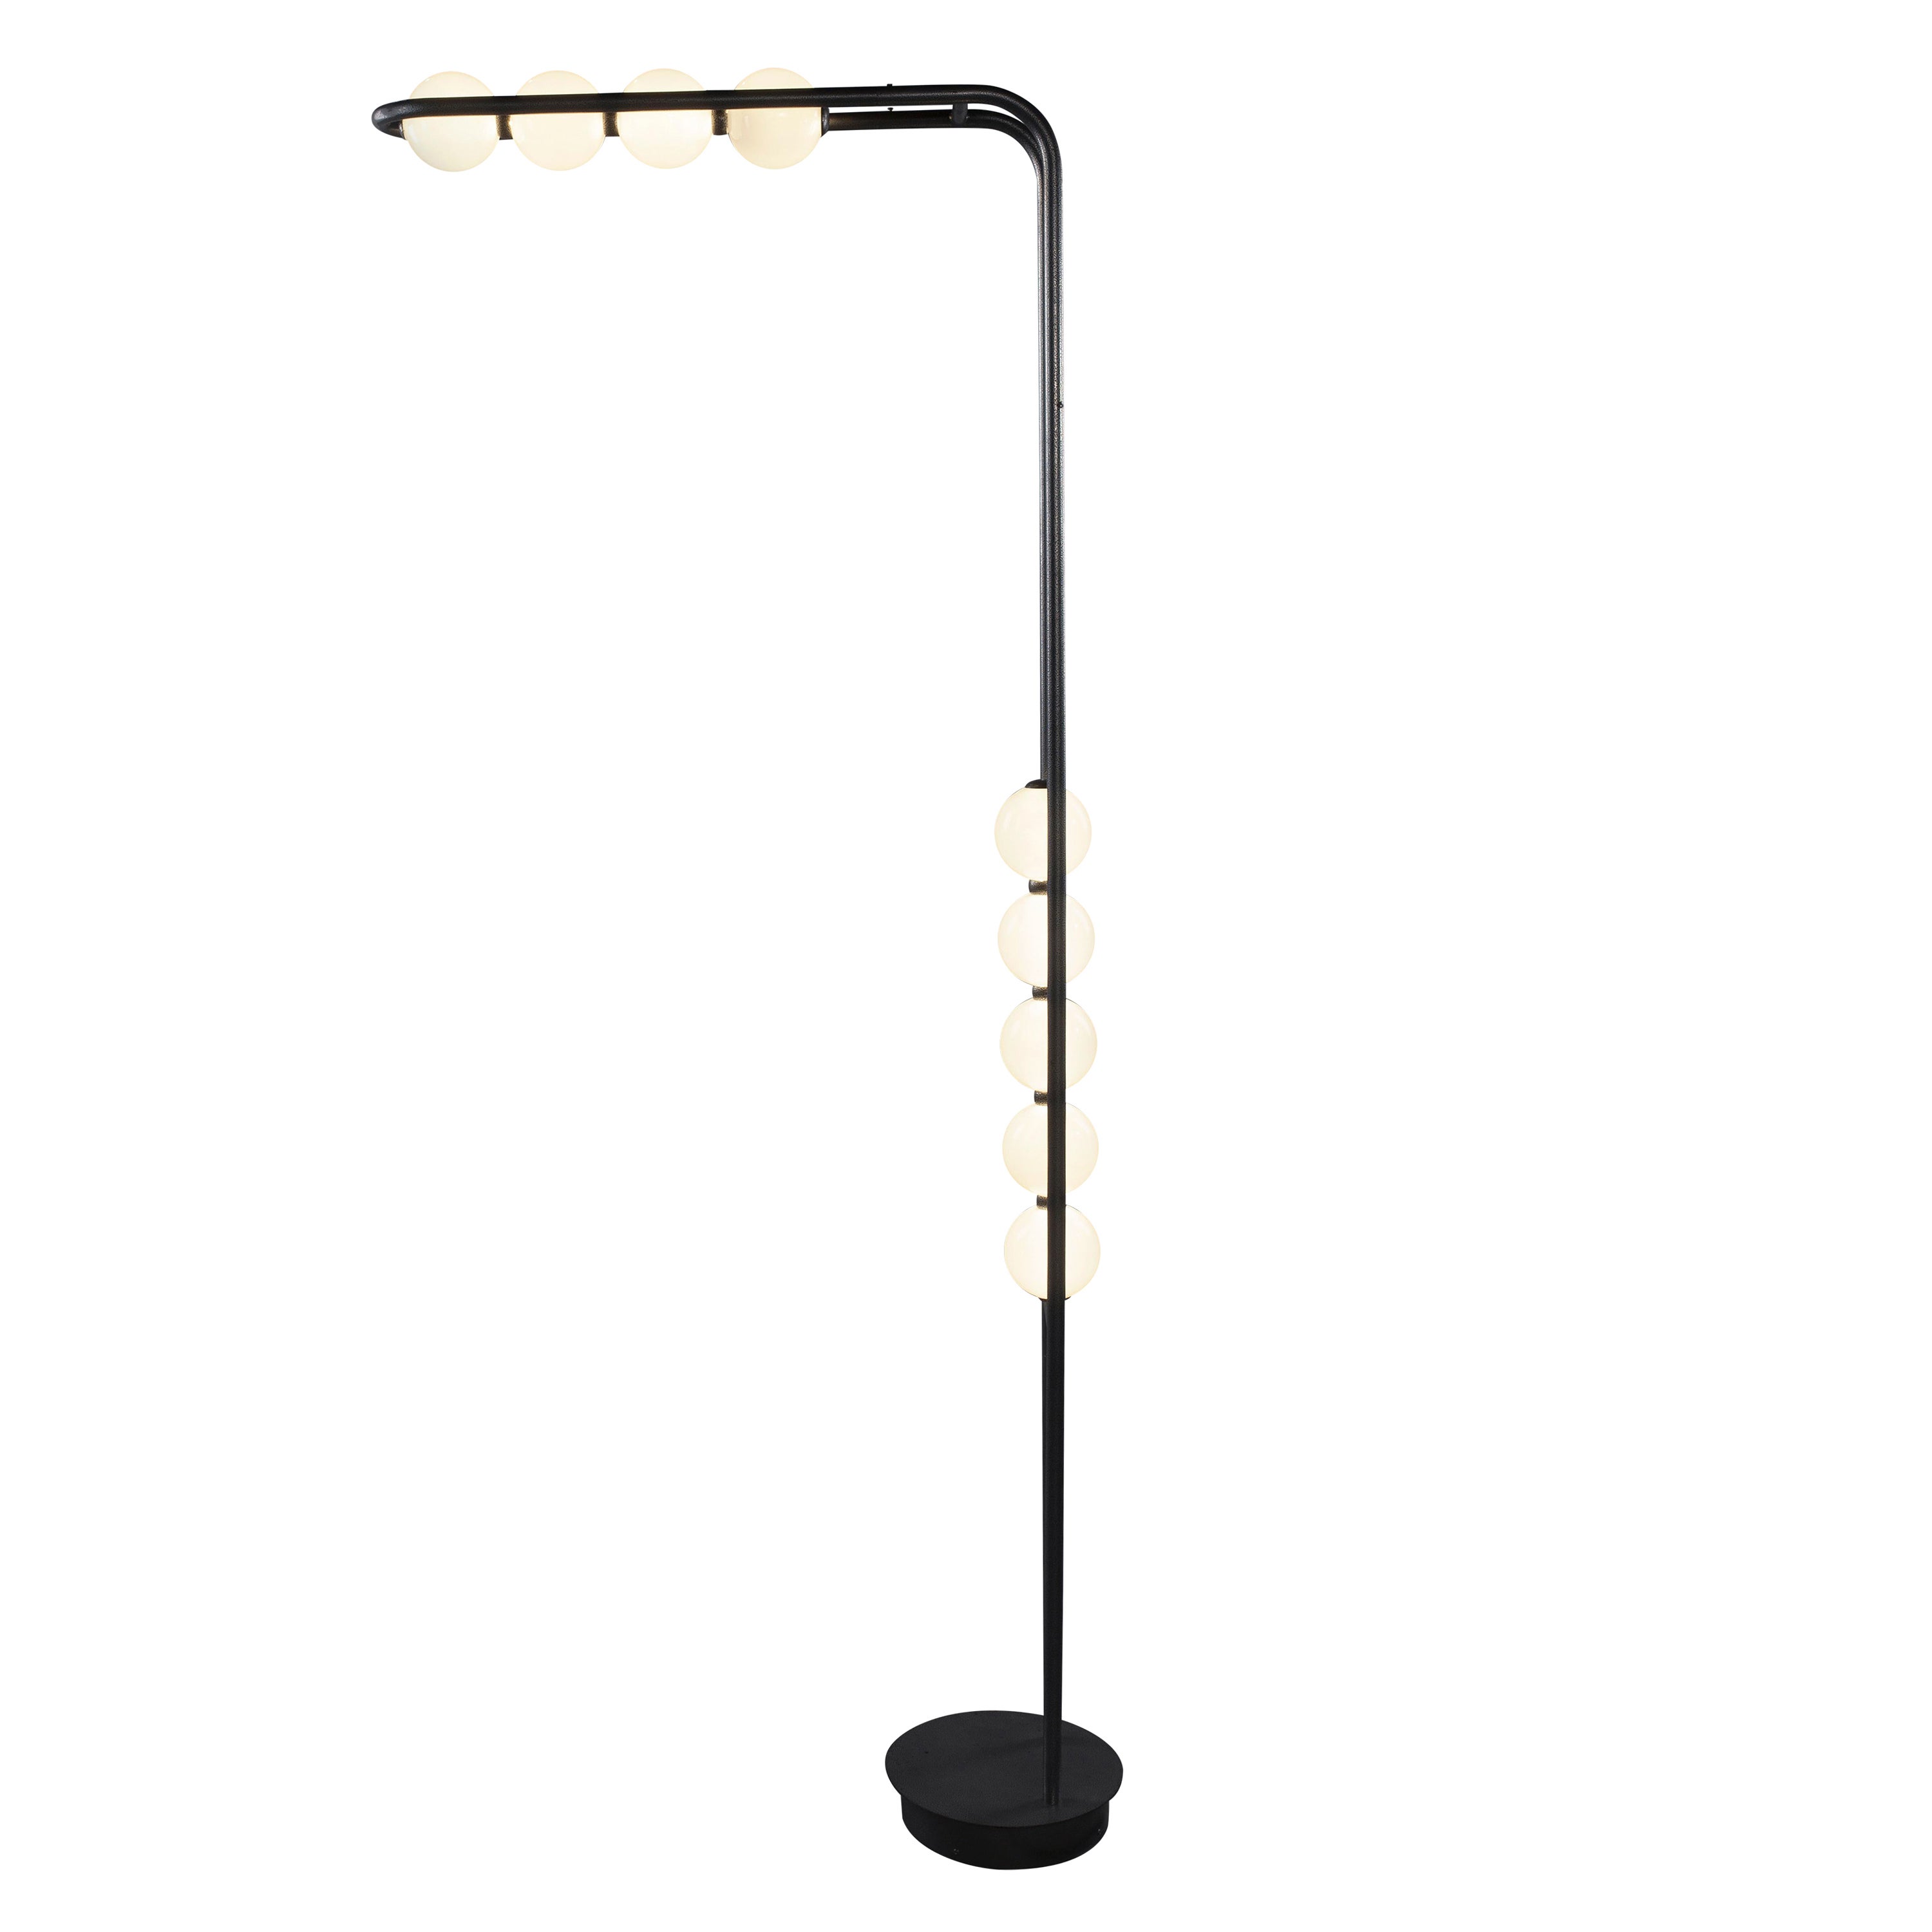 The L Bent Standing Lamp with Integrated LED and MS Powder Coating